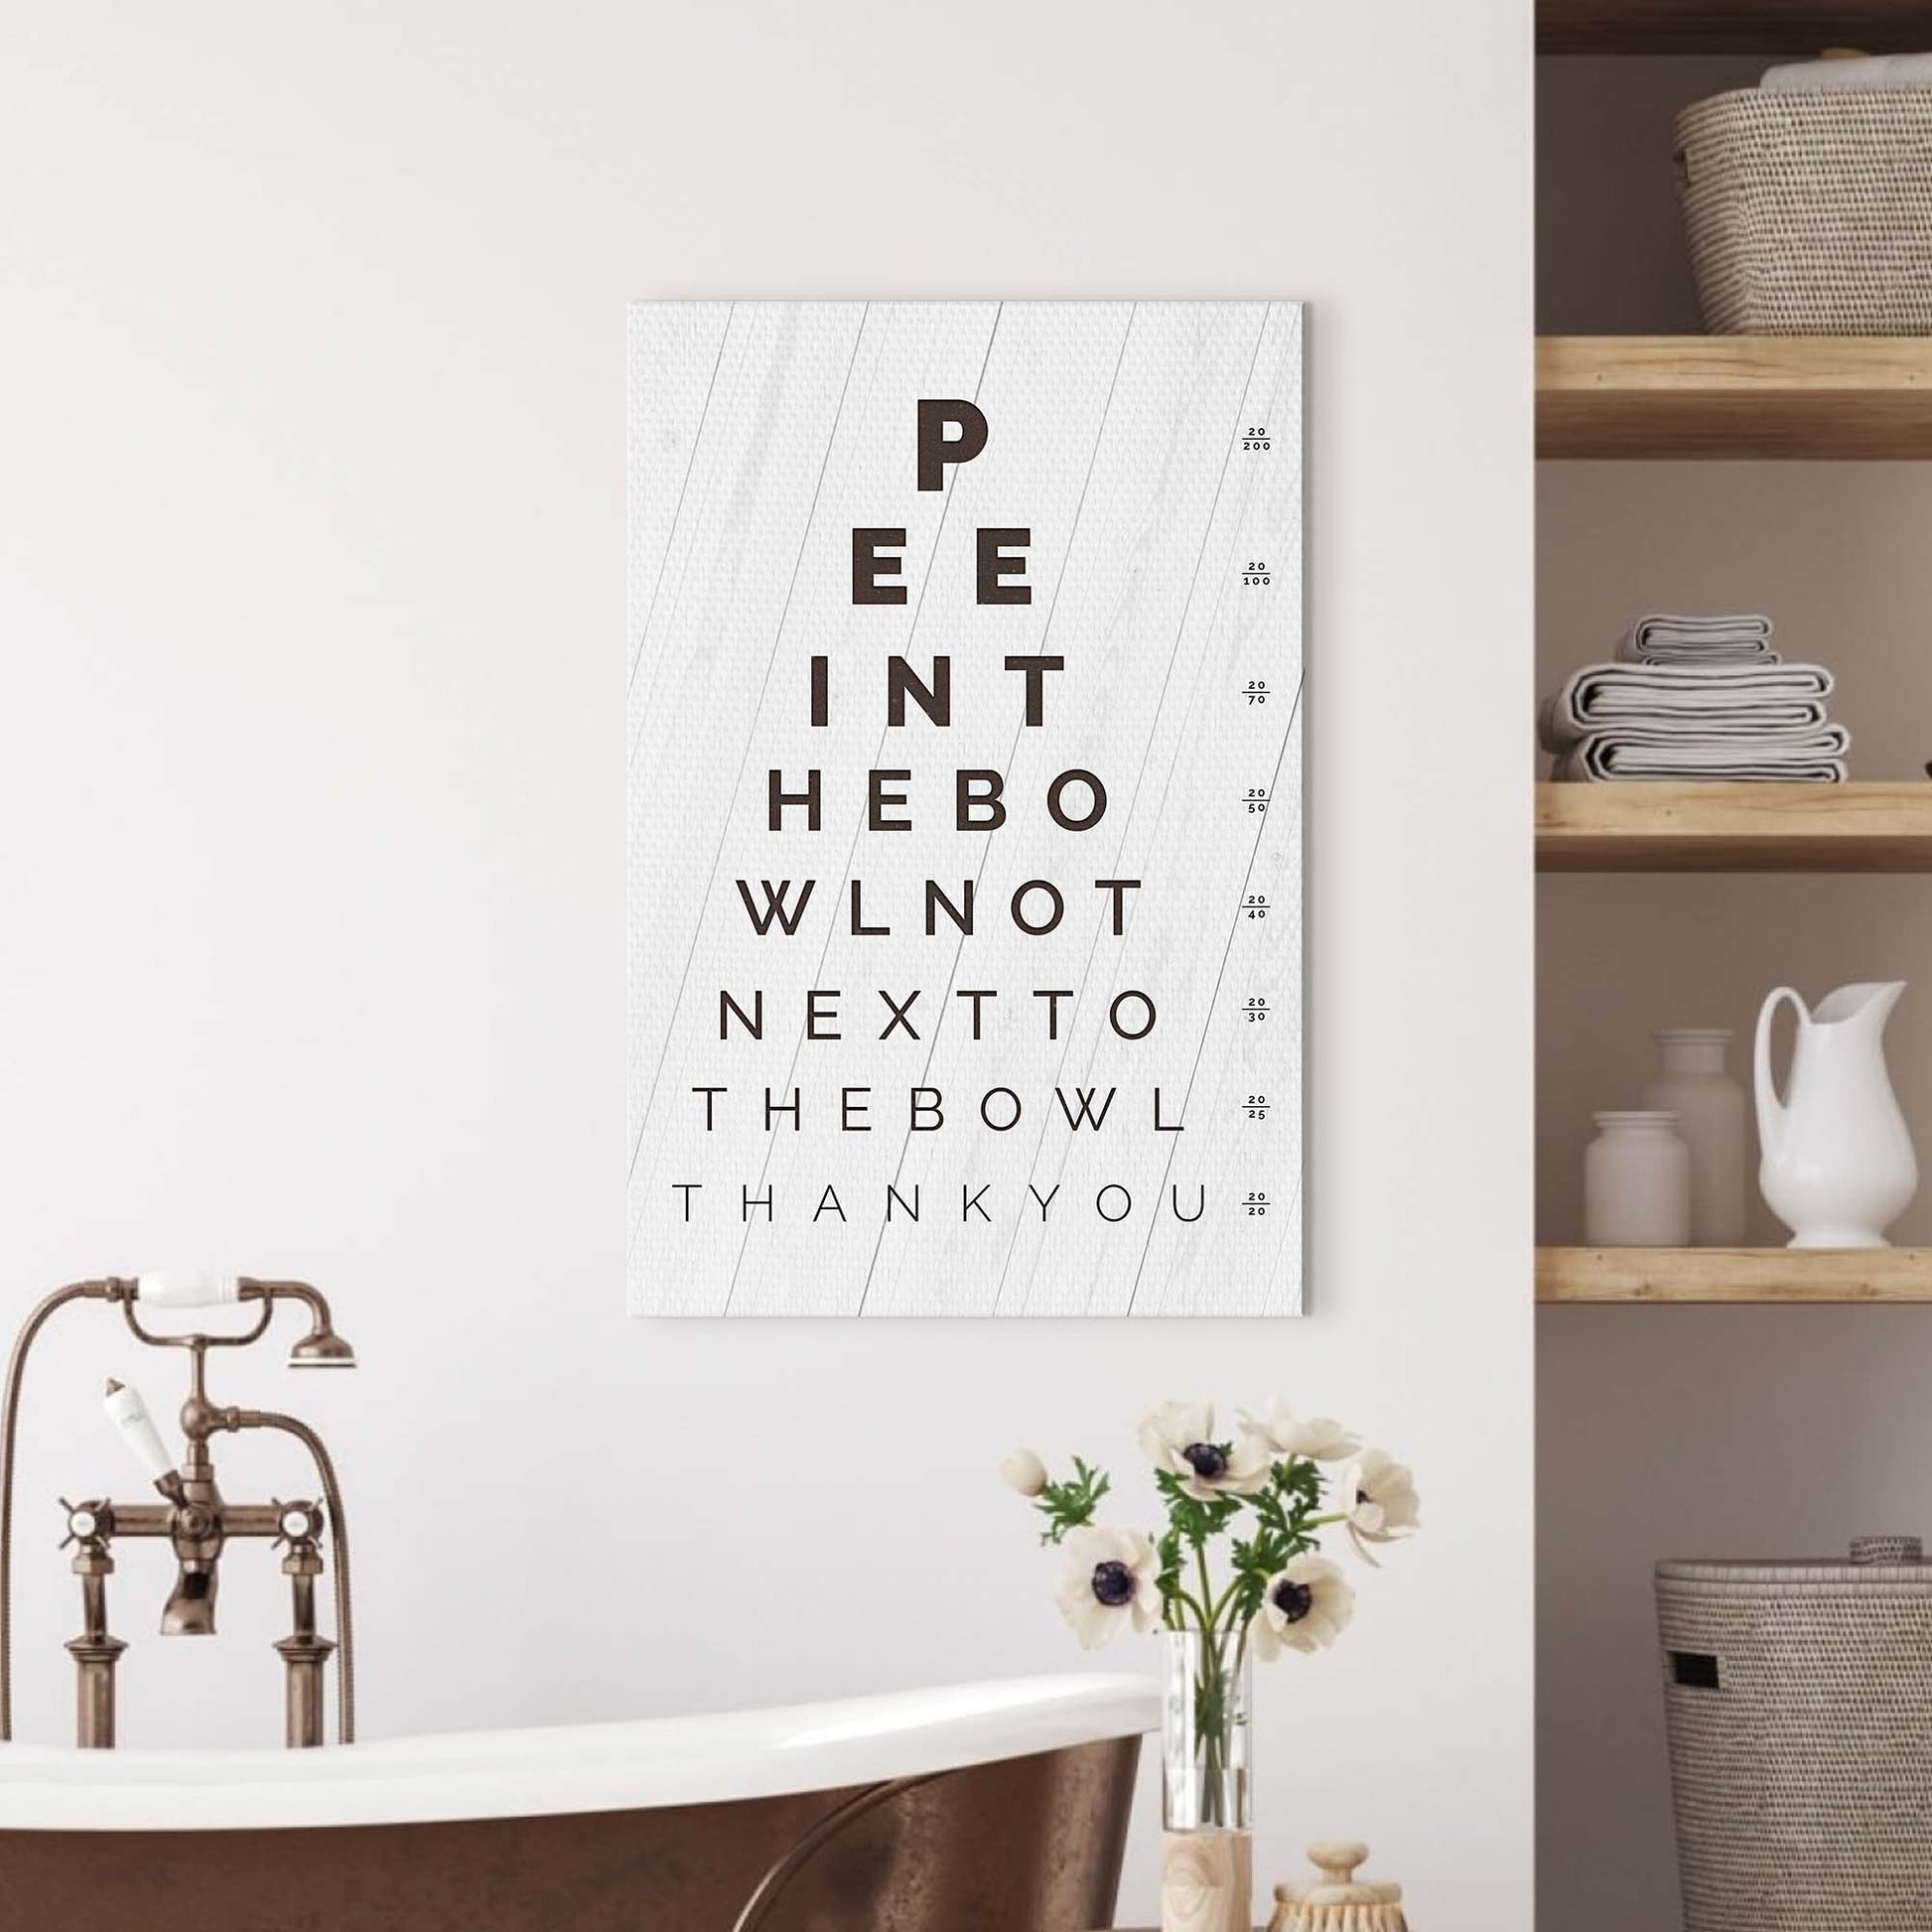 Restroom Eye Exam Sign Style 2 - Imaged by Tailored Canvases